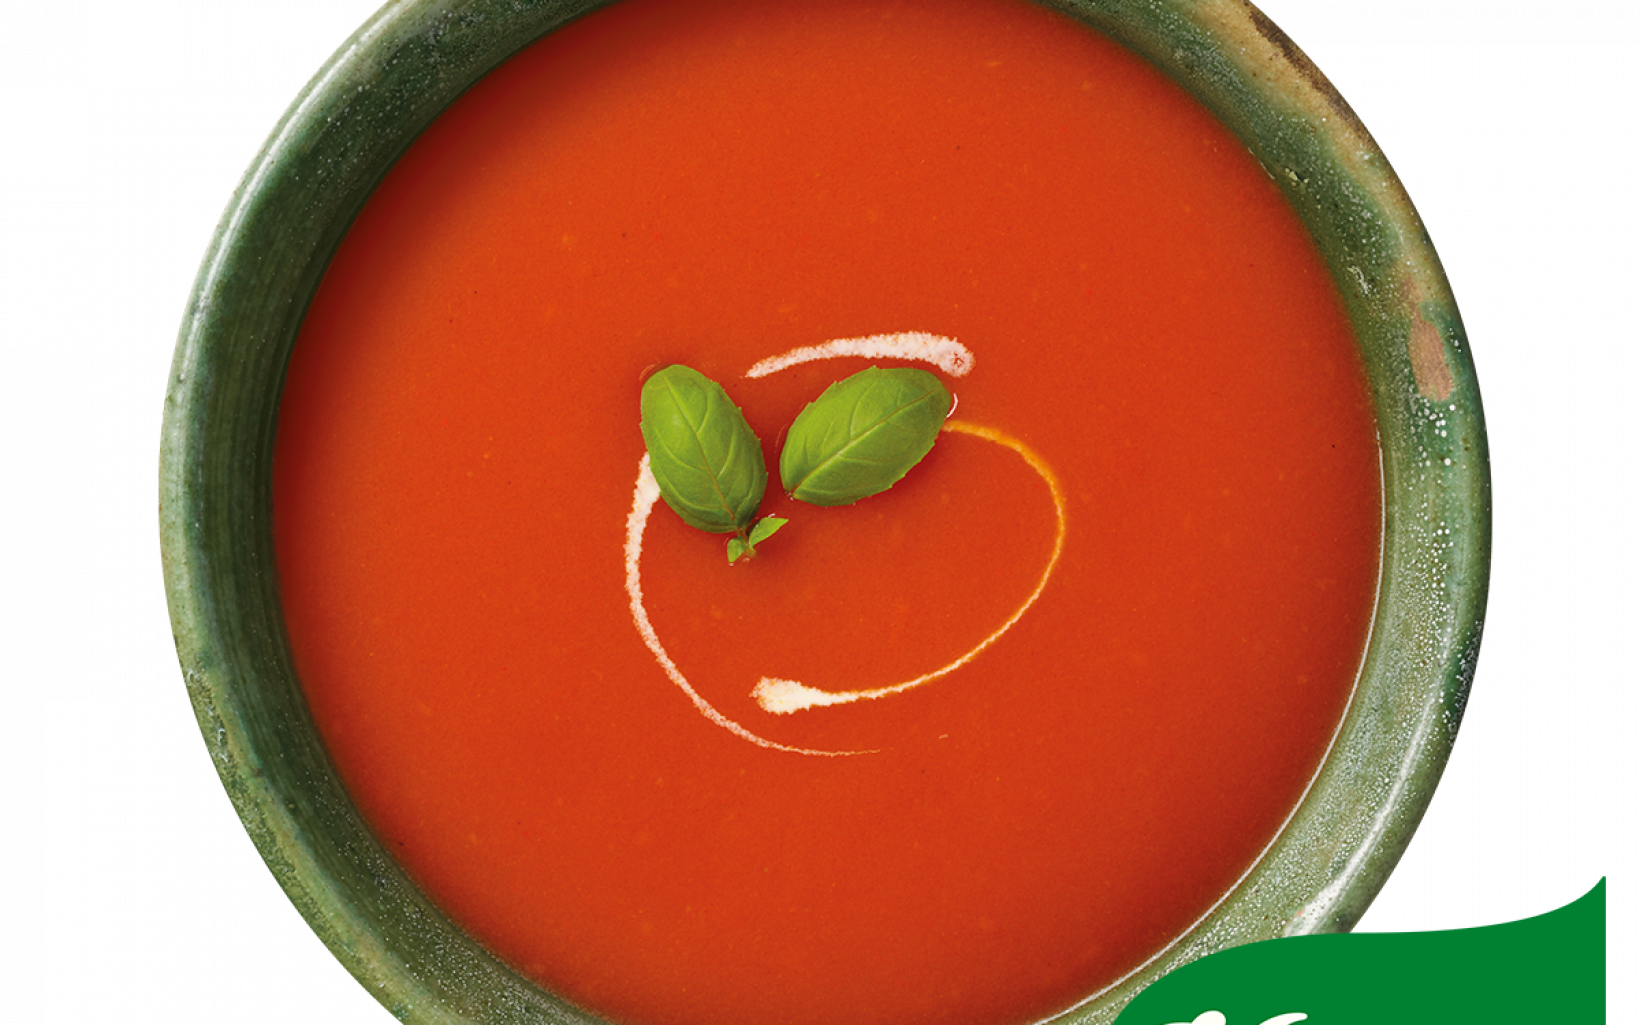 23664 Uk Knorr Classic Cream Of Tomato Soup With Logo Supp Image 1200x1200px 20203pm